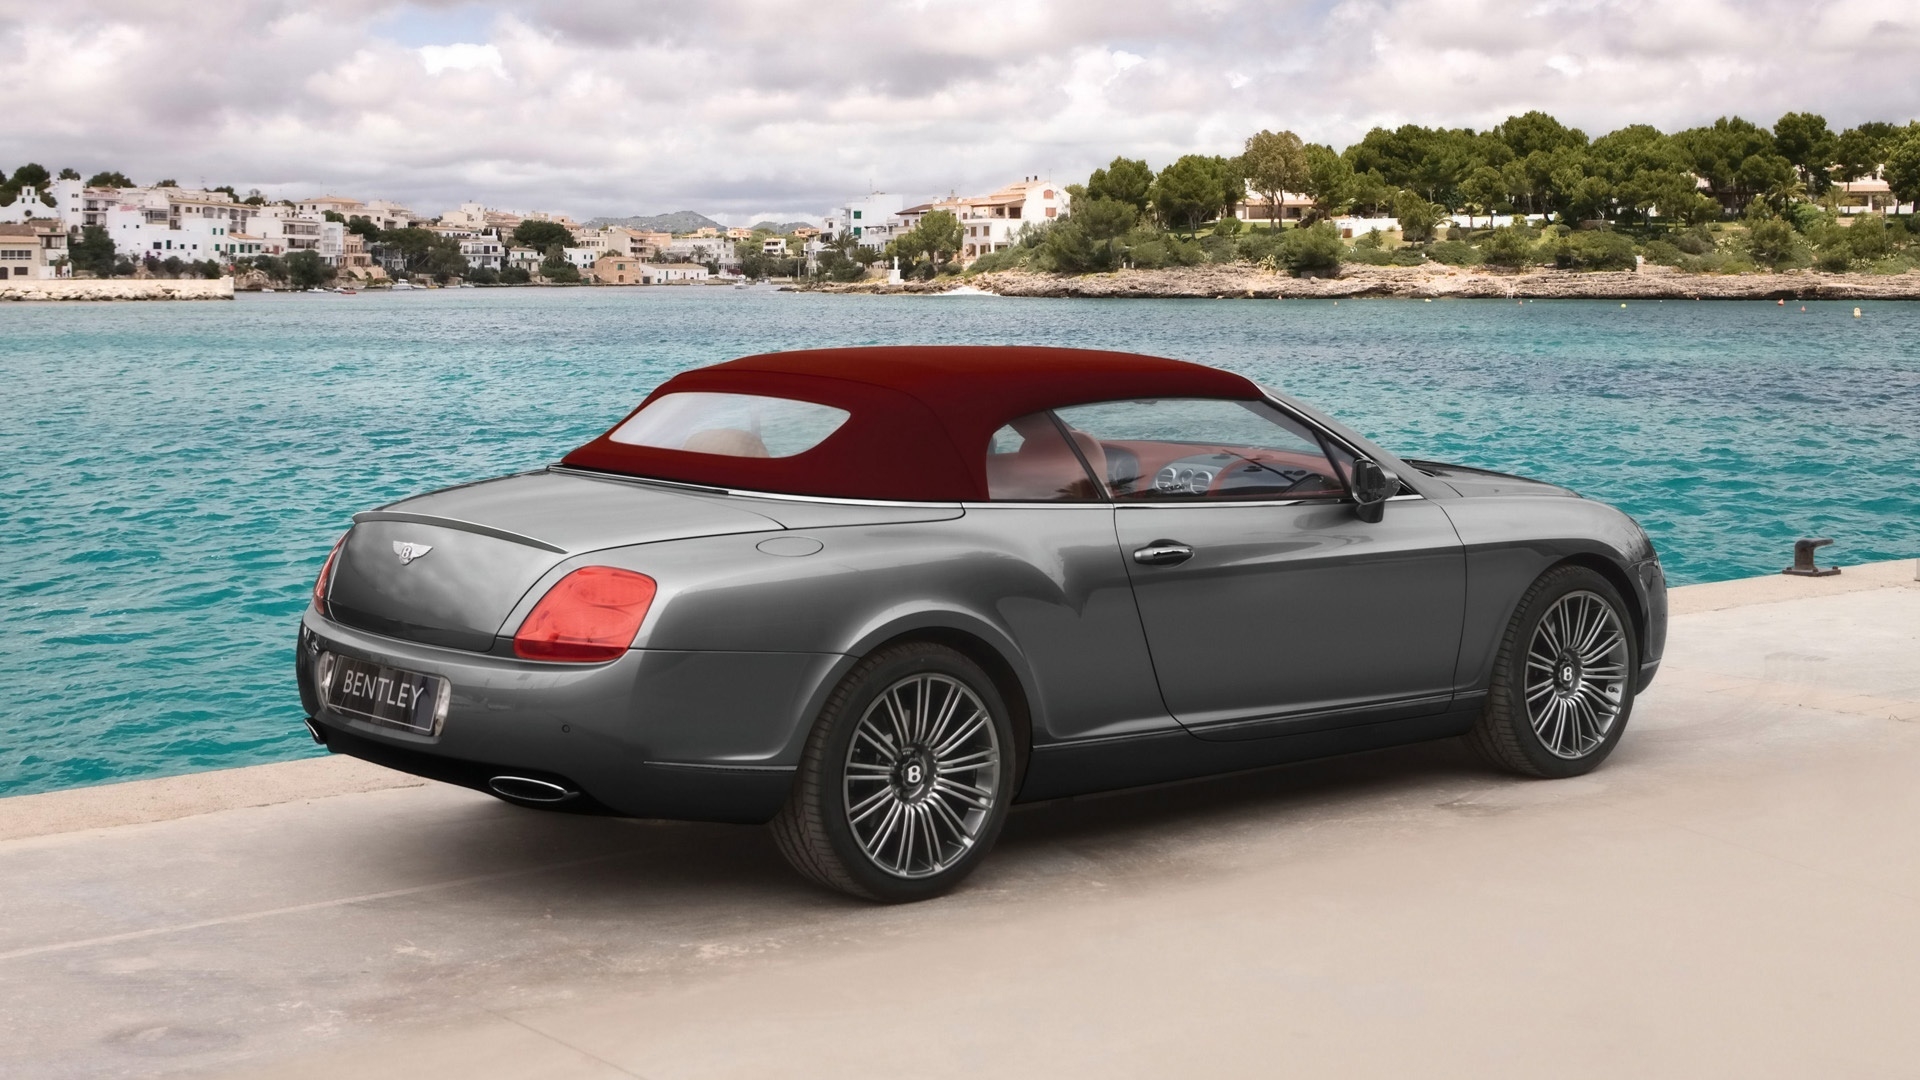 Bentley Continental GTC 2009 for 1920 x 1080 HDTV 1080p resolution